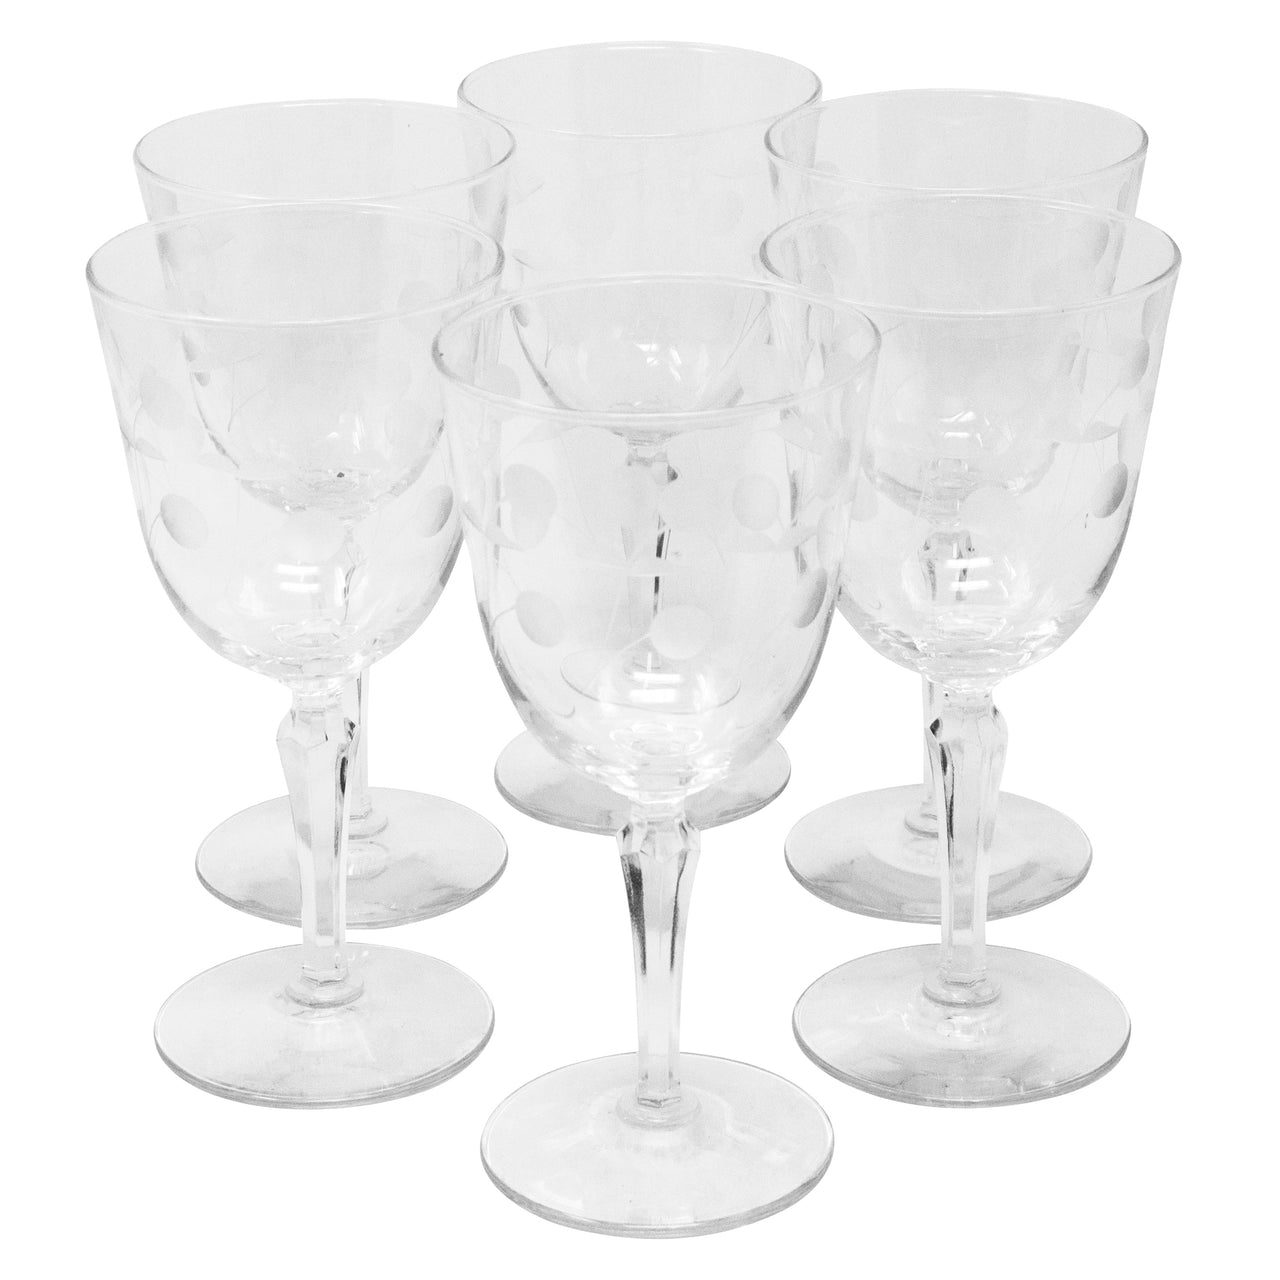 Vintage Etched Cherries and Stems Crystal Wine Glasses | The Hour Shop